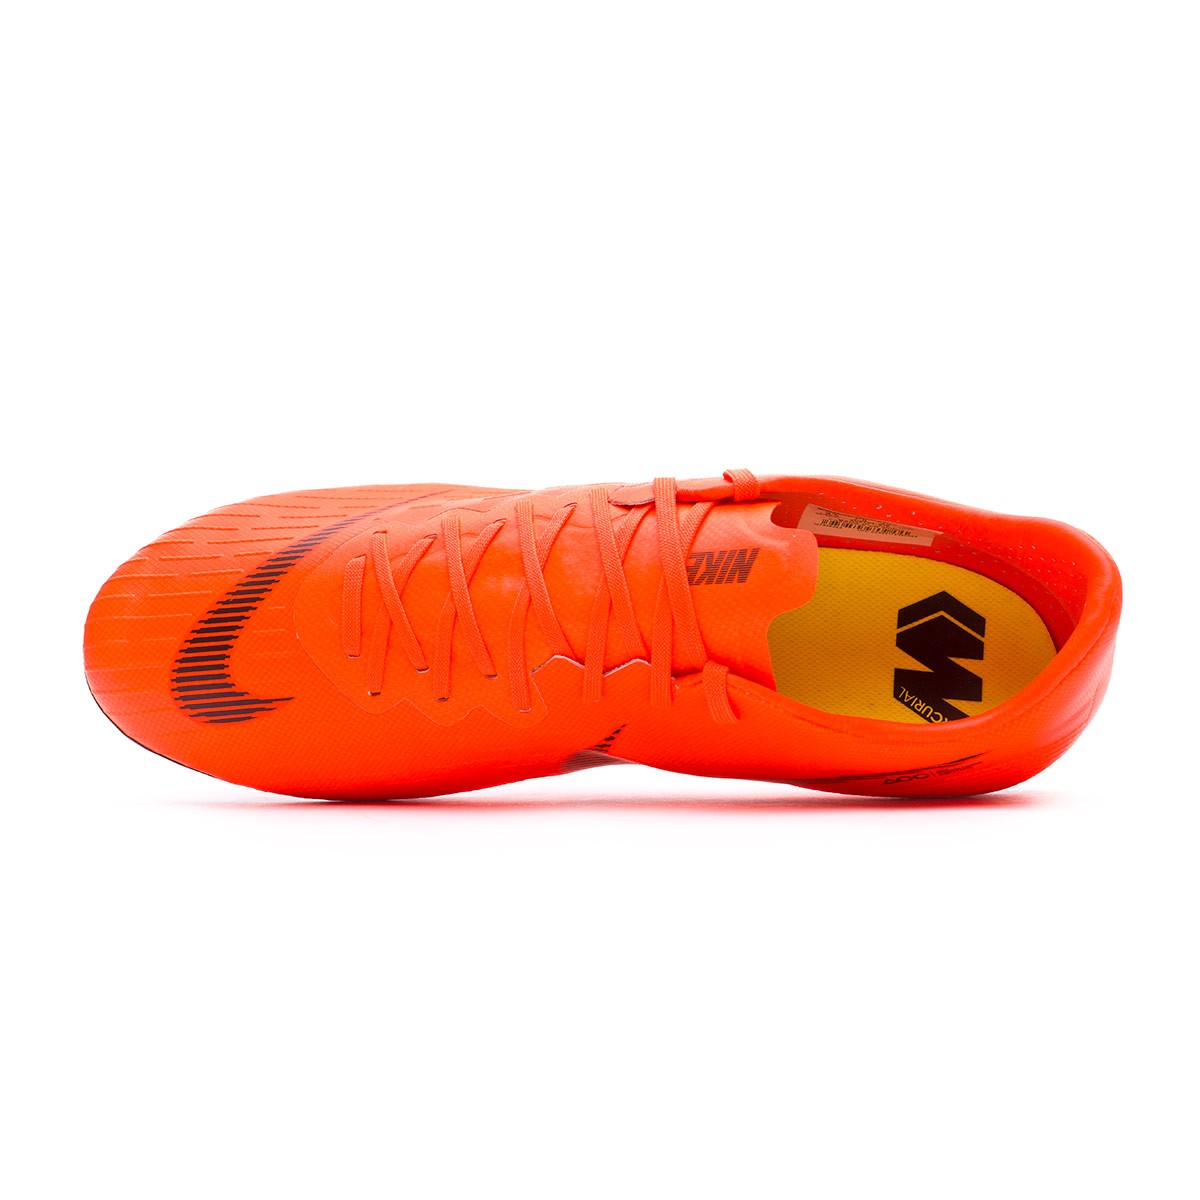 Nike Elite 2 10 Size Mercurial Cup Vapor Superfly World